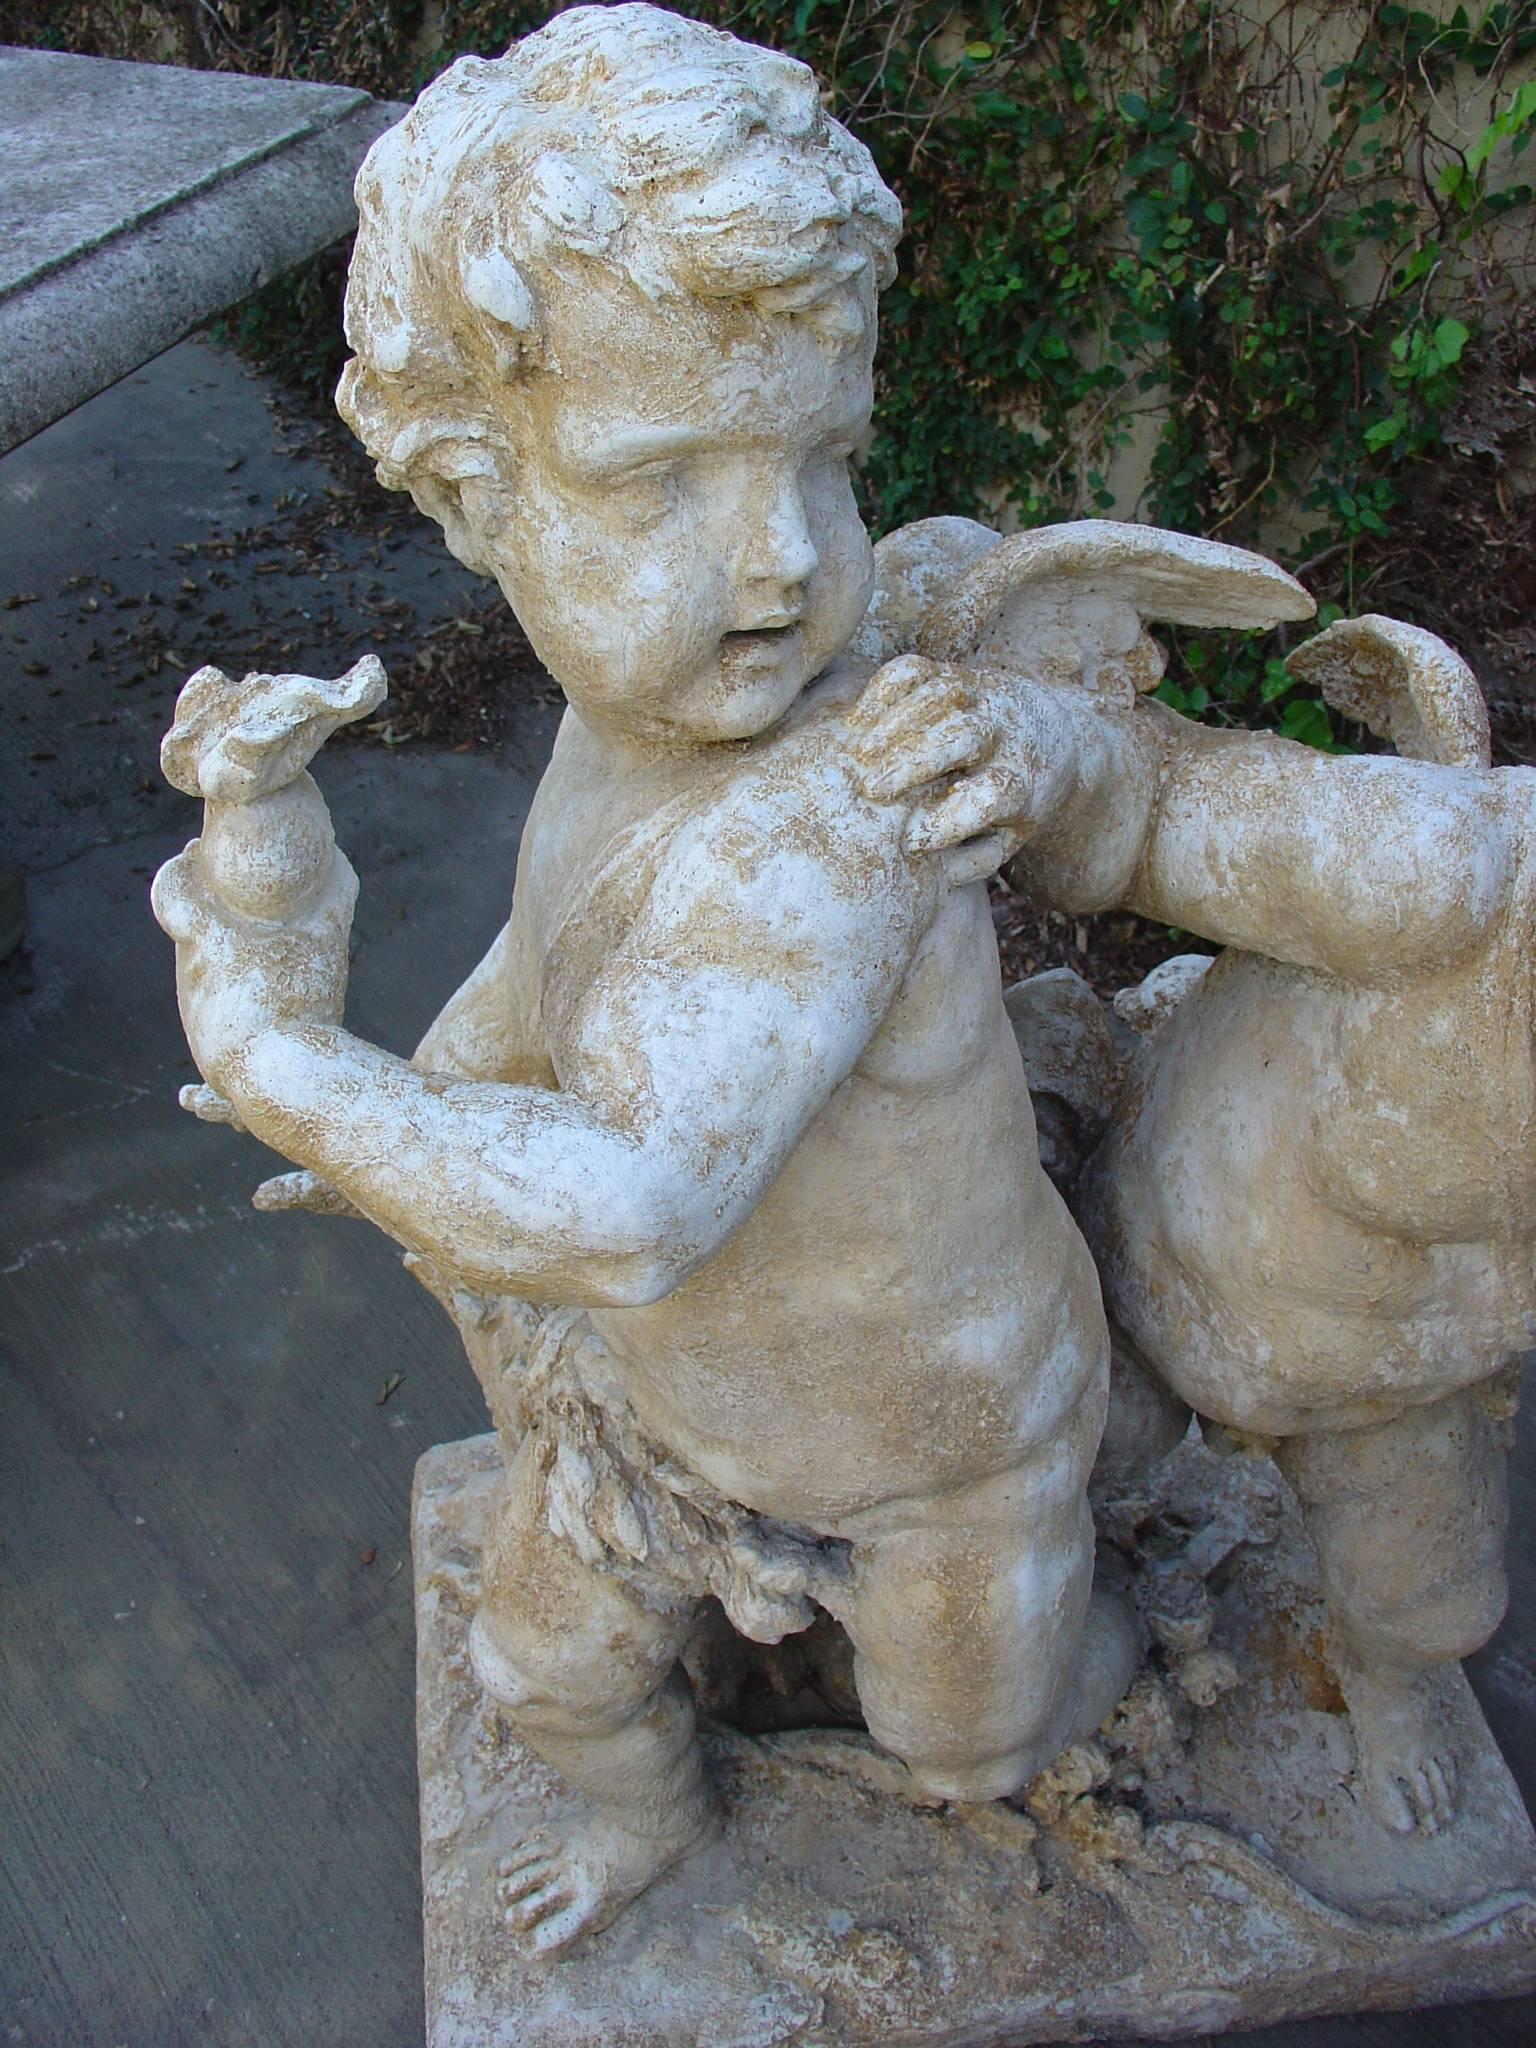 This is a pair of cast stone cupids from France. They are cast from a mold that was taken off the original statue in Paris, France. It was salvaged from a building pediment and was sold to a private collector. First appearing in Classical Greek